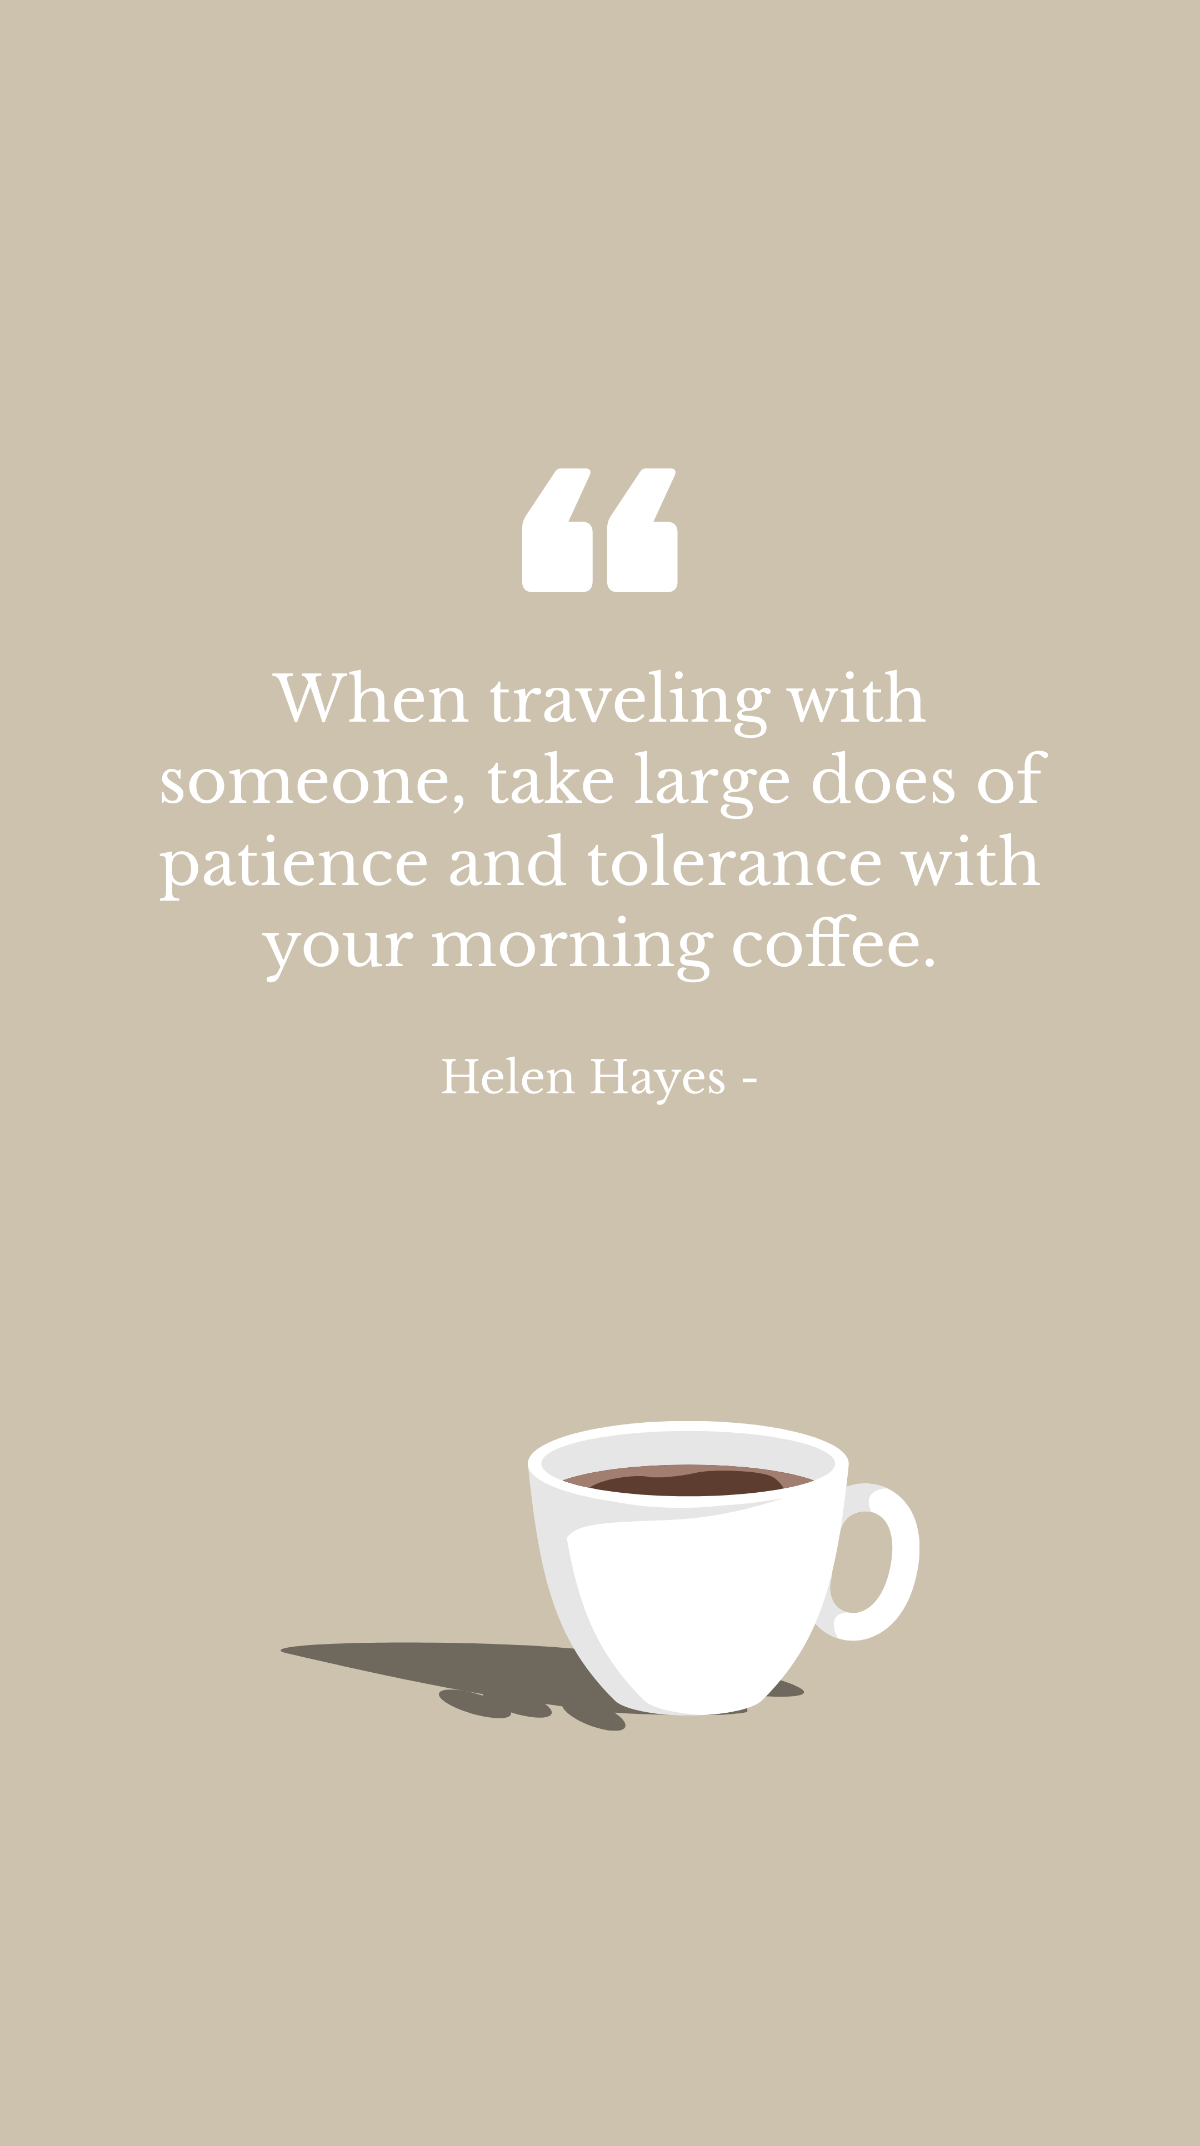 Helen Hayes - When traveling with someone, take large does of patience and tolerance with your morning coffee. Template